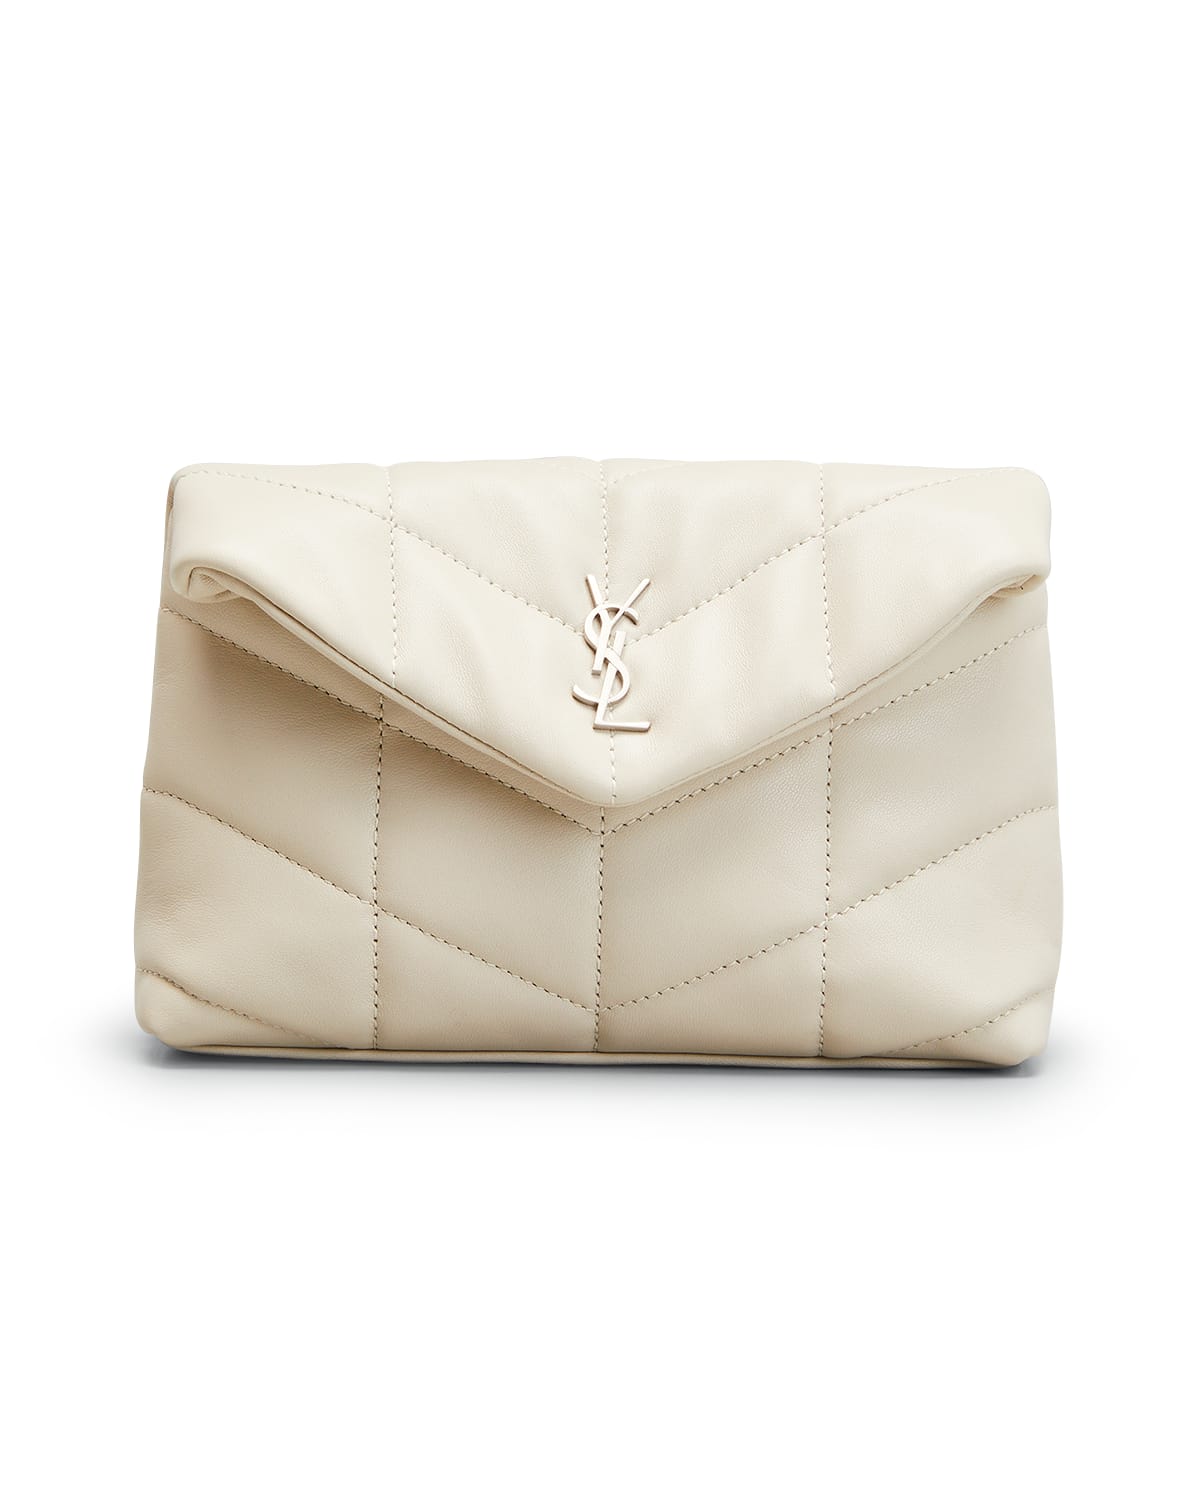 SAINT LAURENT LOULOU QUILTED PUFFER POUCH CLUTCH BAG